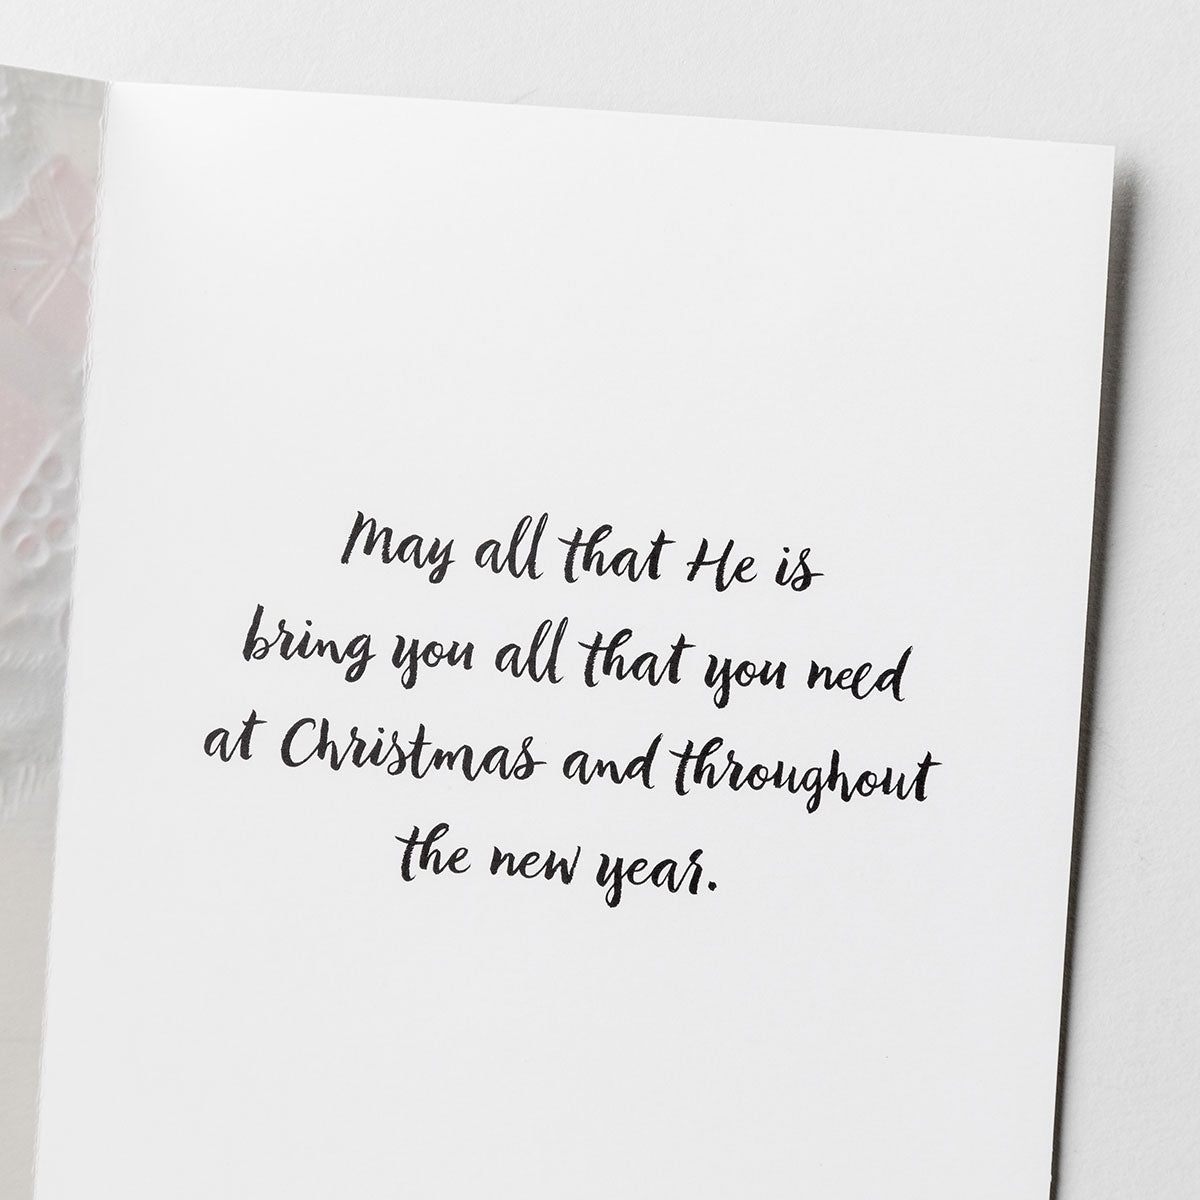 Christmas Cards - Jesus is the Gift (50 cards) - The Christian Gift Company